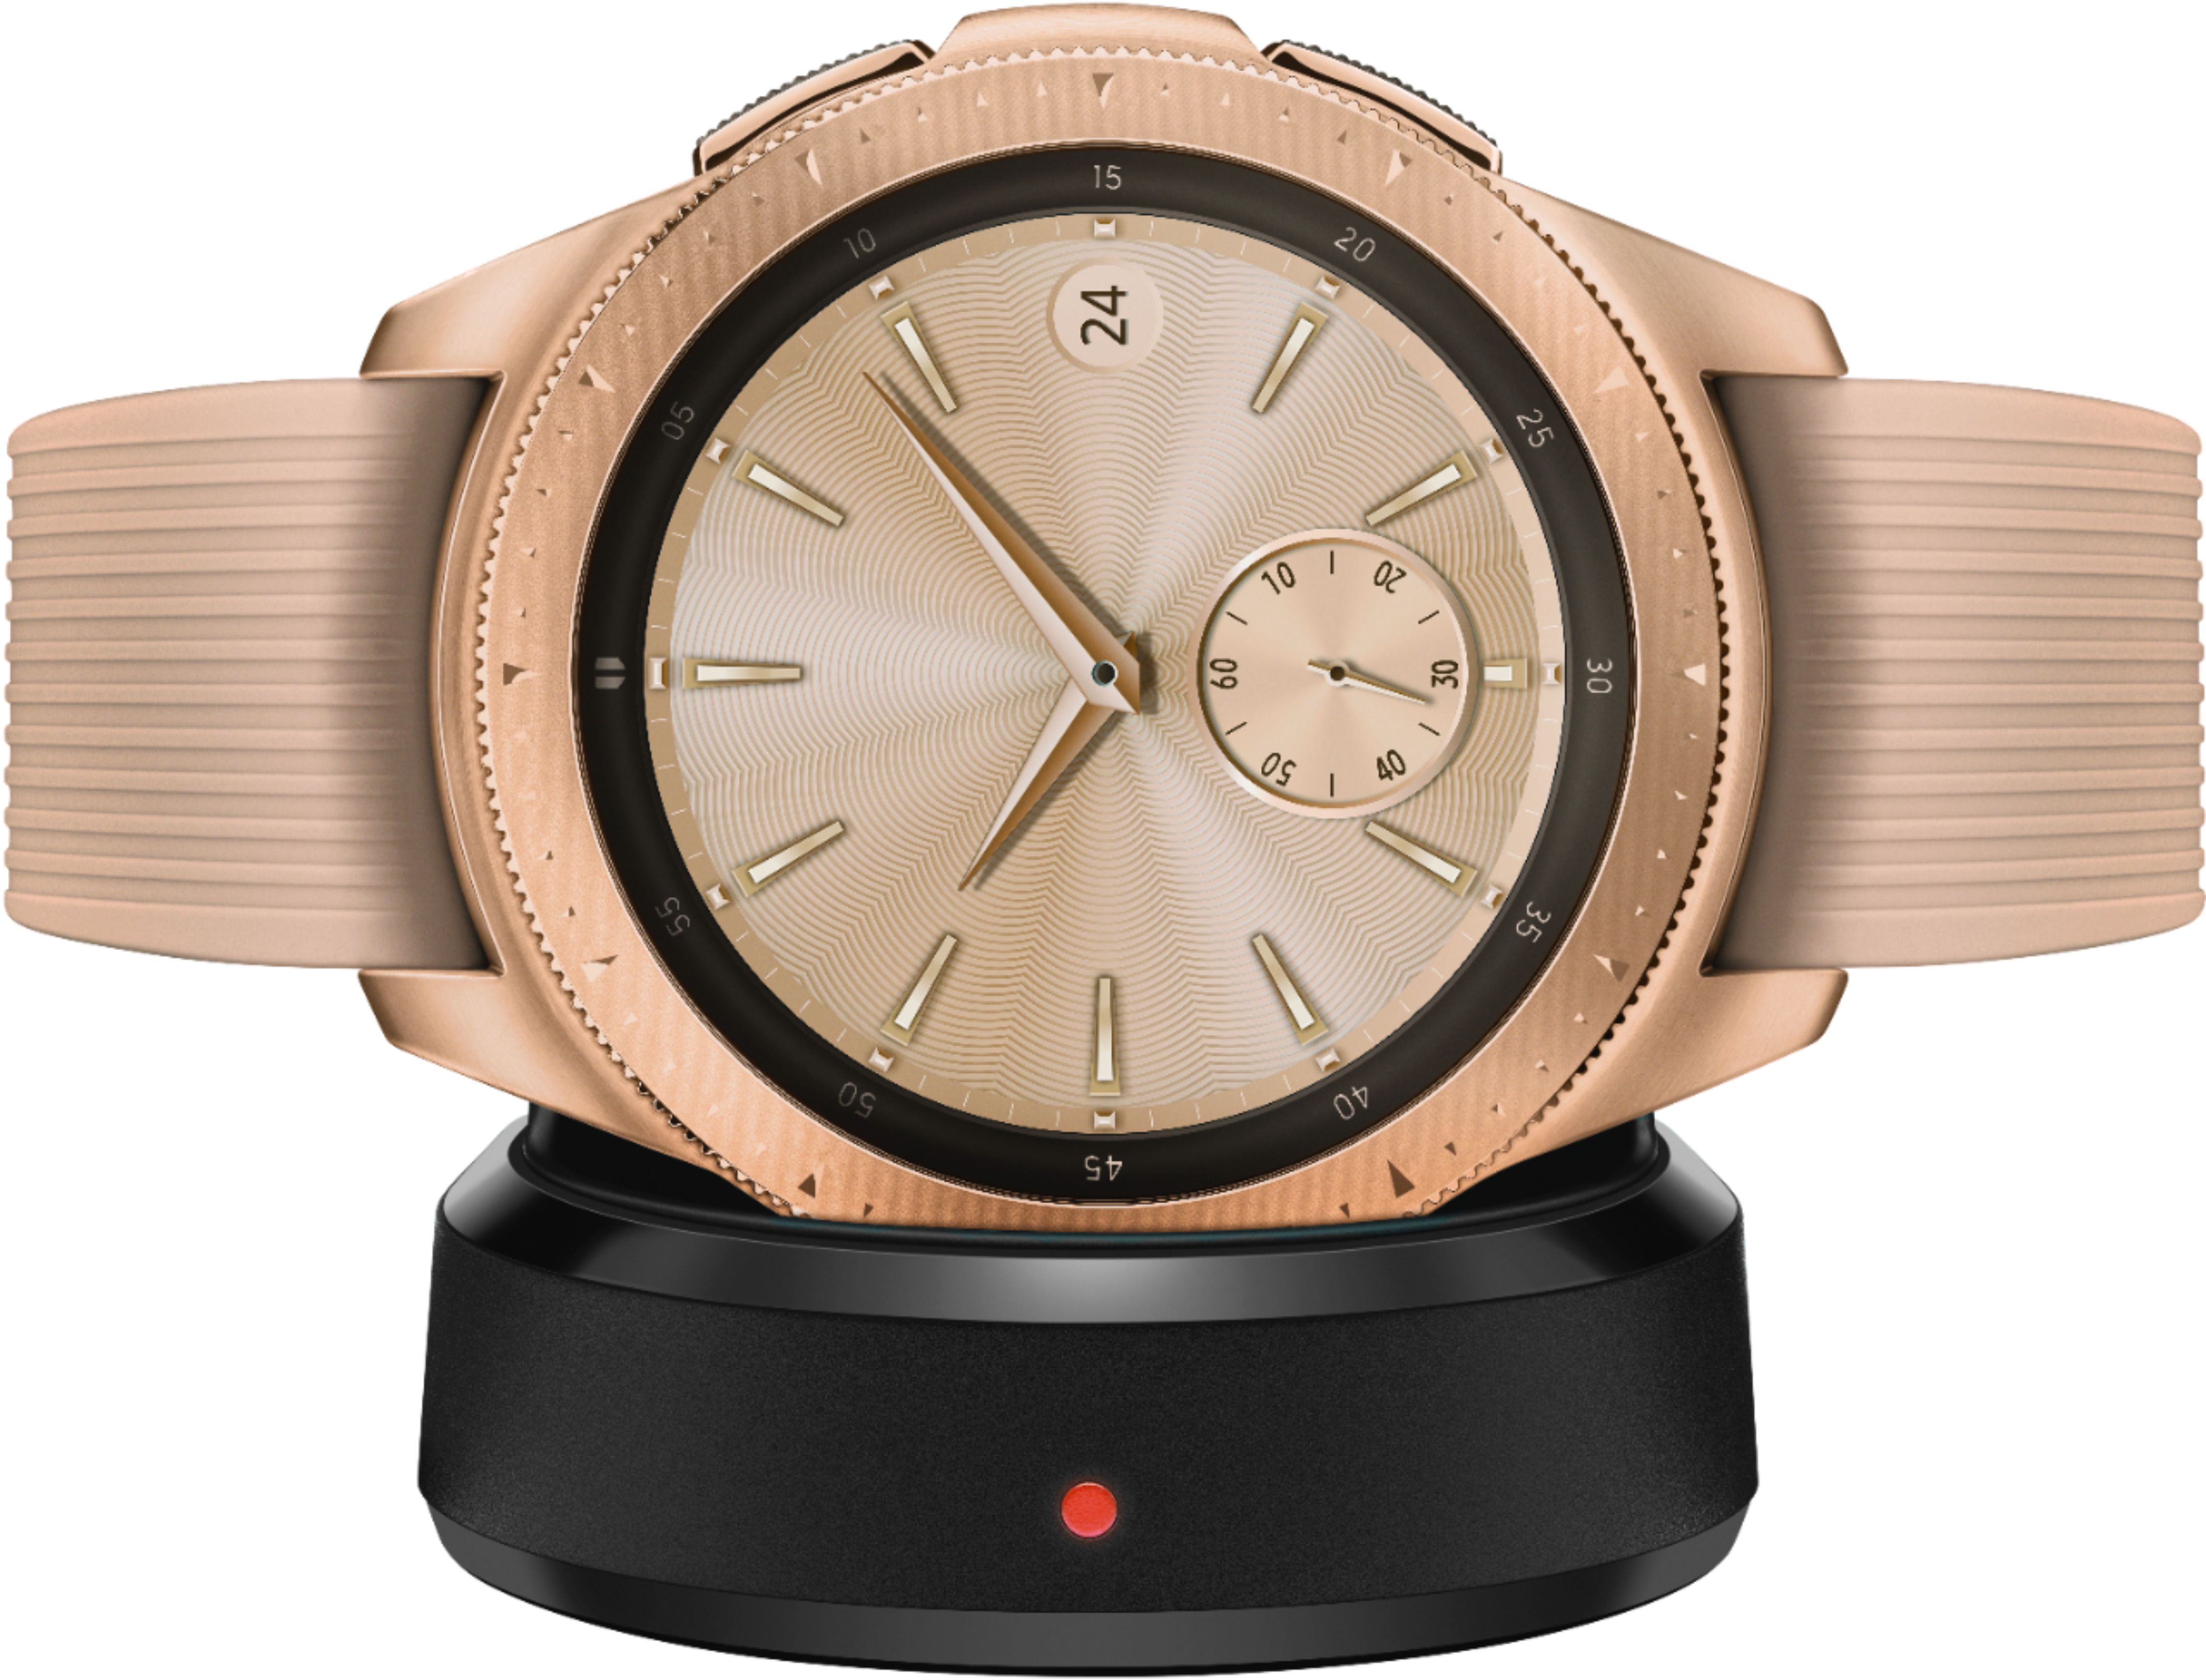 Buy new Galaxy Watch6 LTE (40mm) Gold - Price & Offers